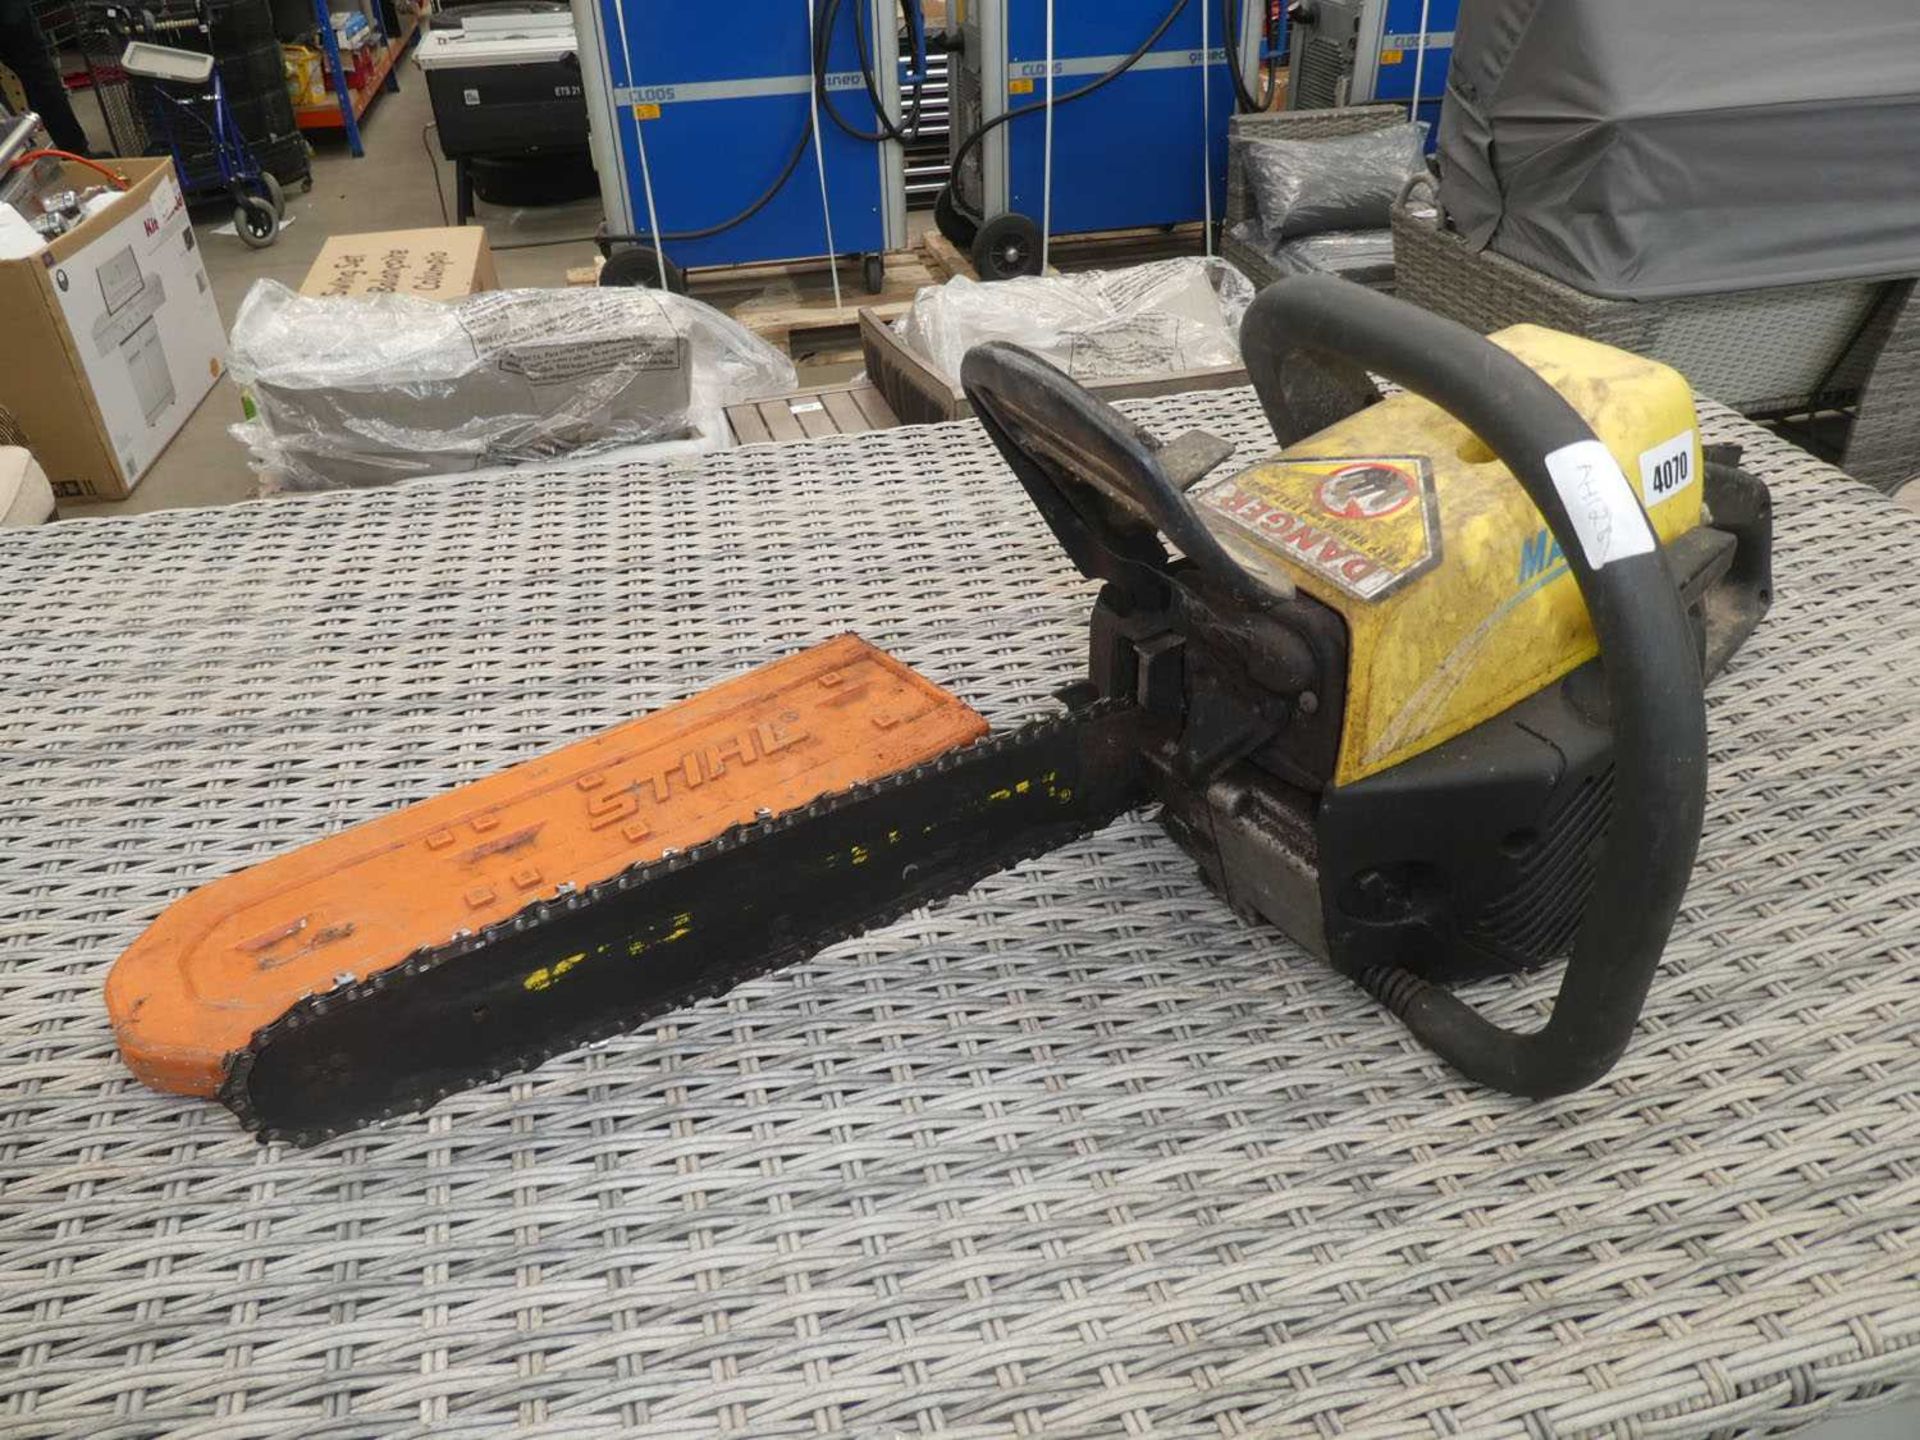 Mcculloch petrol powered chainsaw